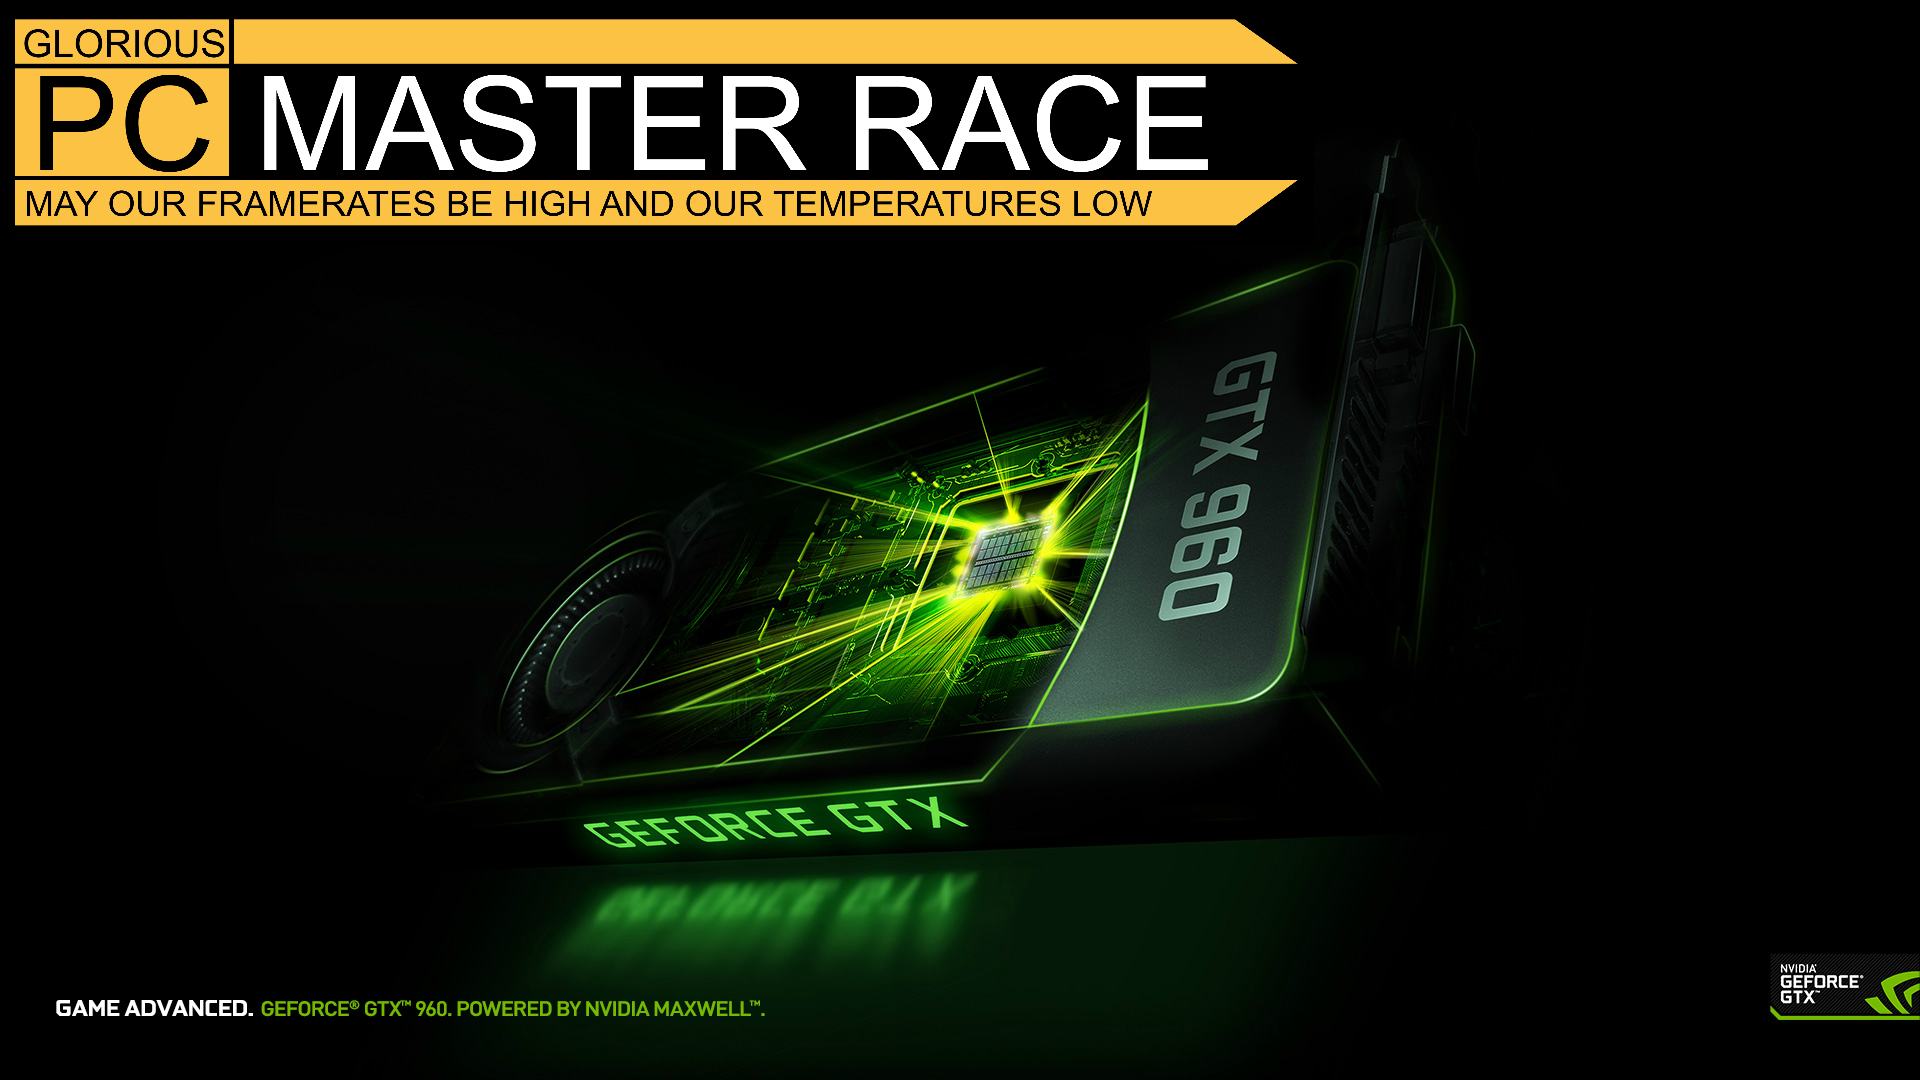 PC Master Race Wallpaper for my GTX 960 Brothers! - Imgur